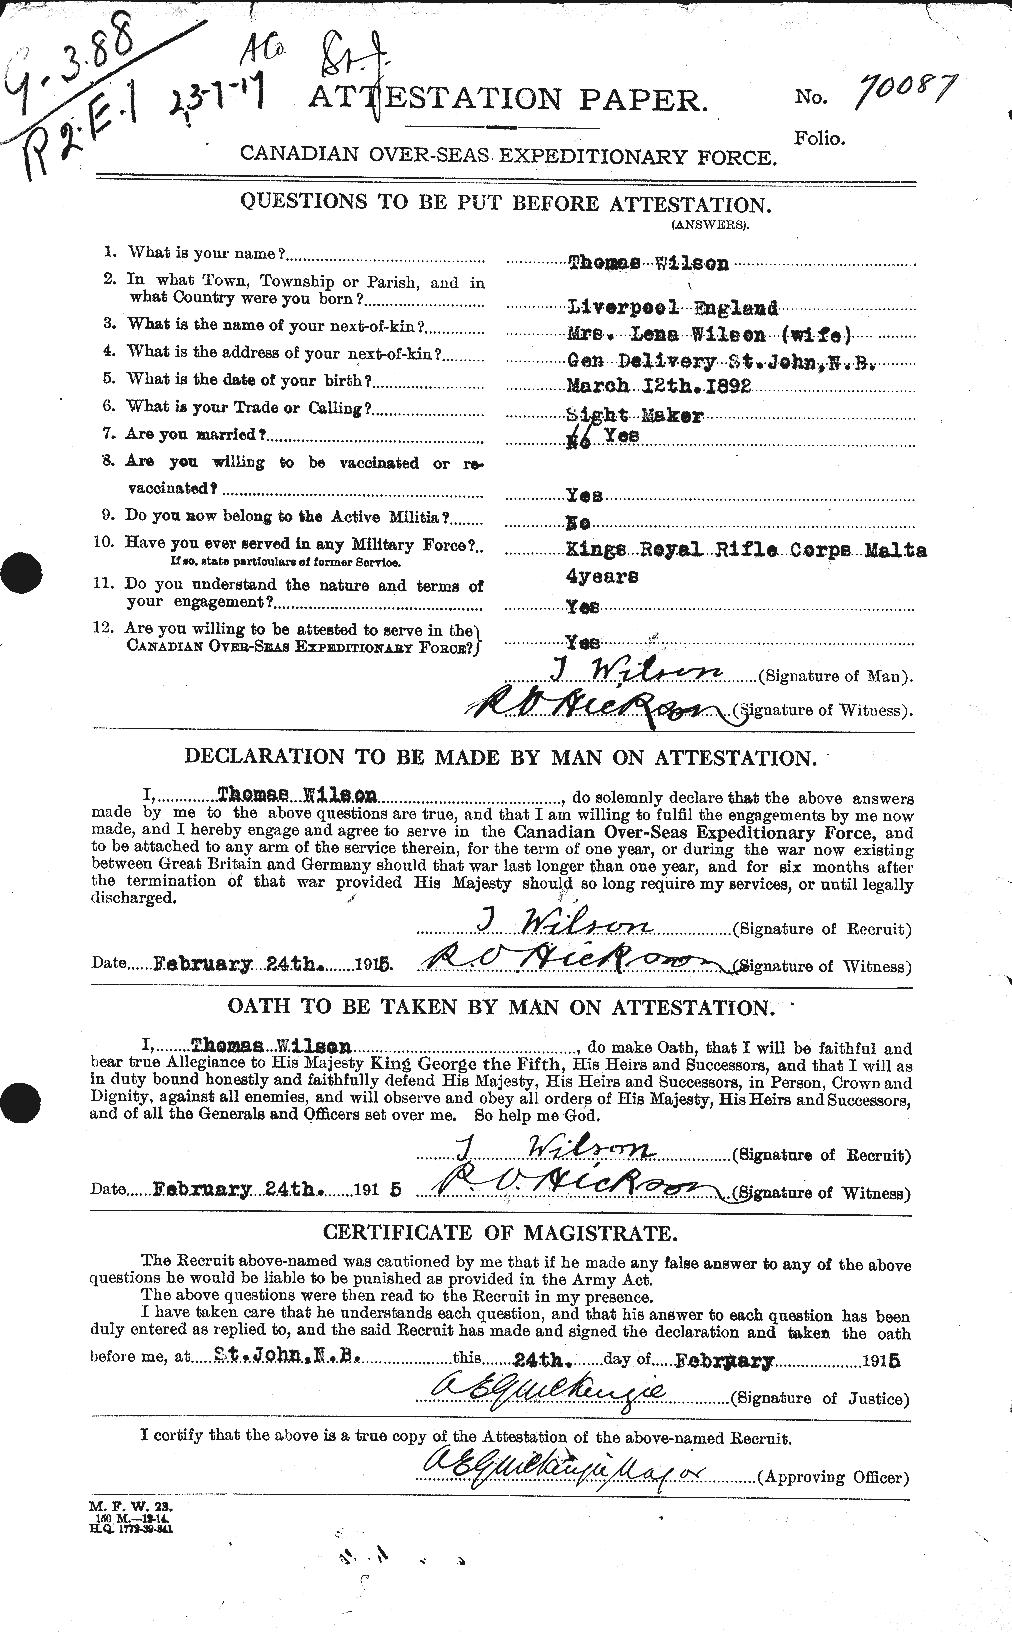 Personnel Records of the First World War - CEF 681226a